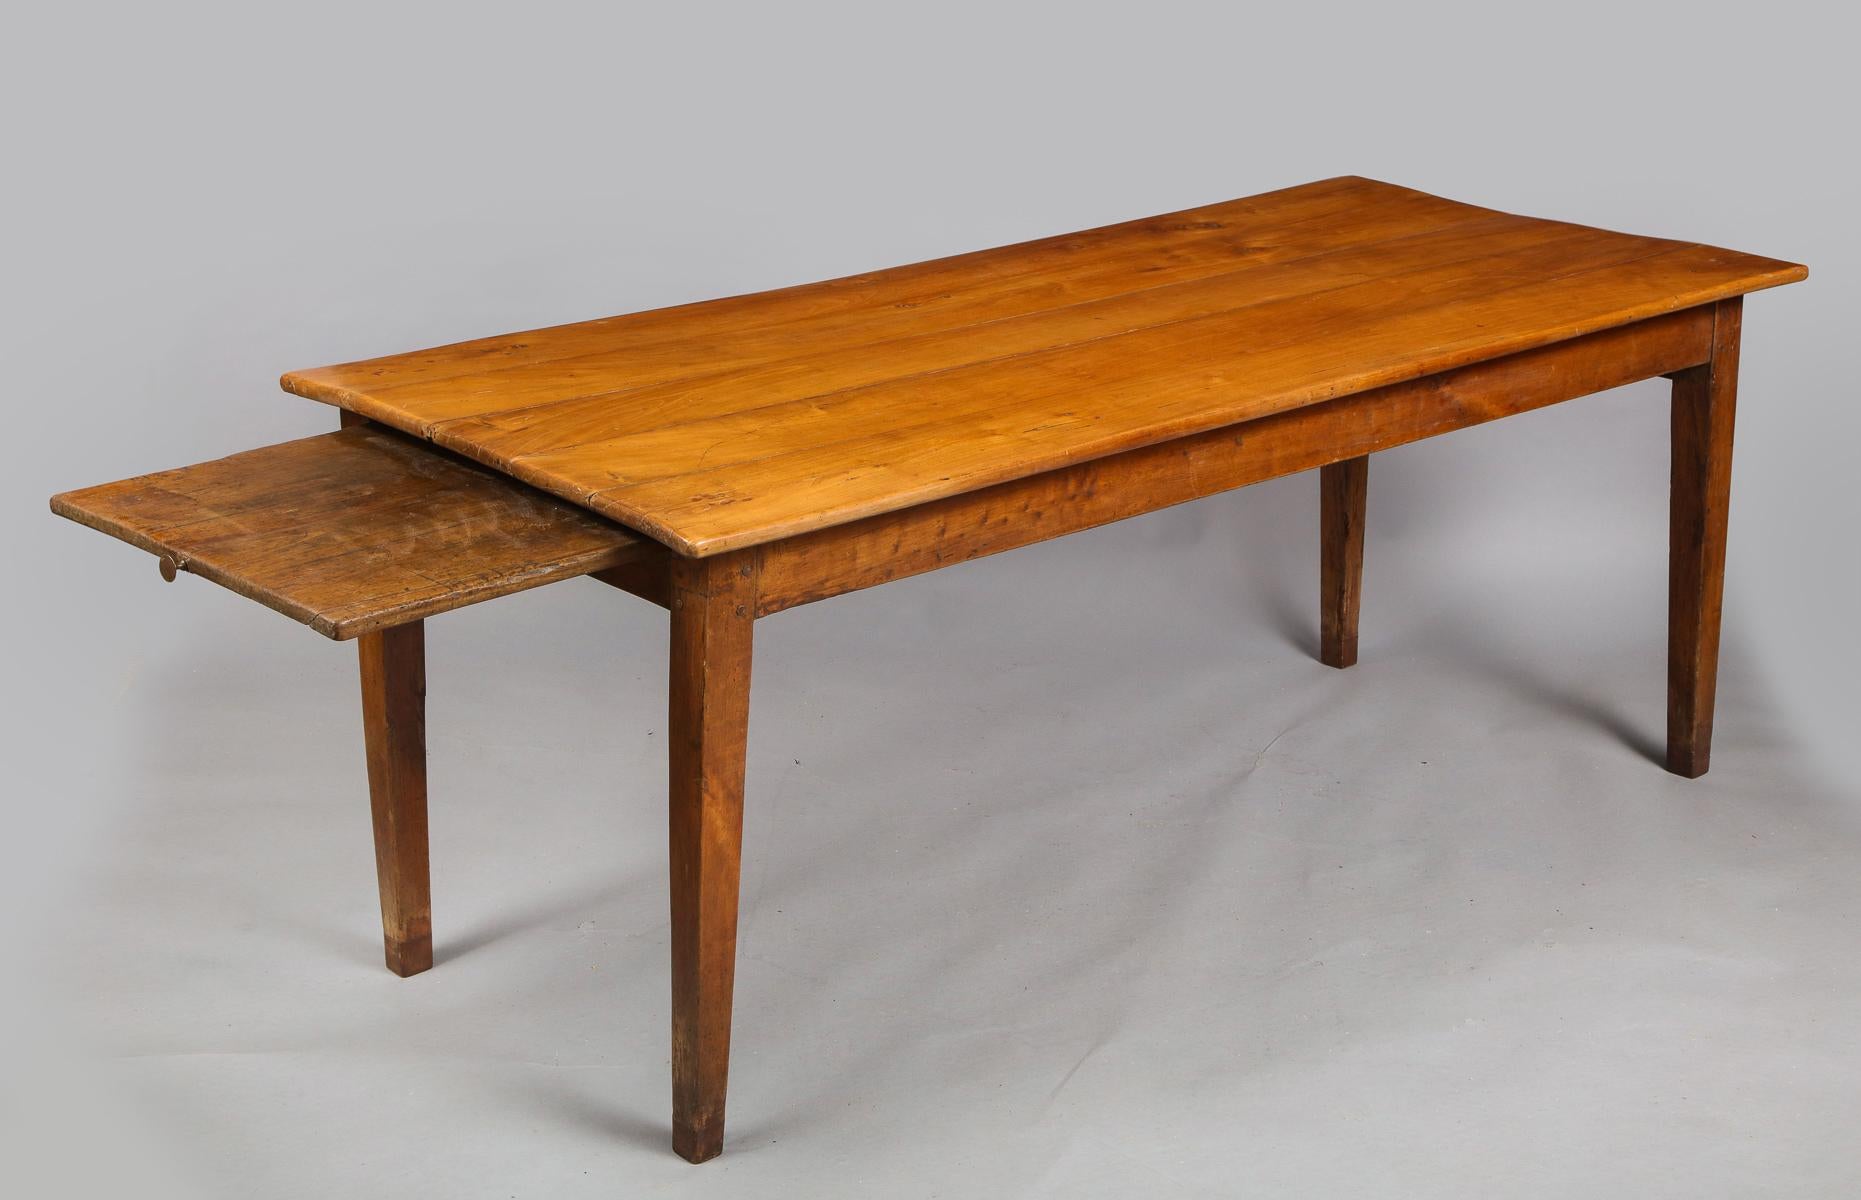 French Antique Cherry Farm Table